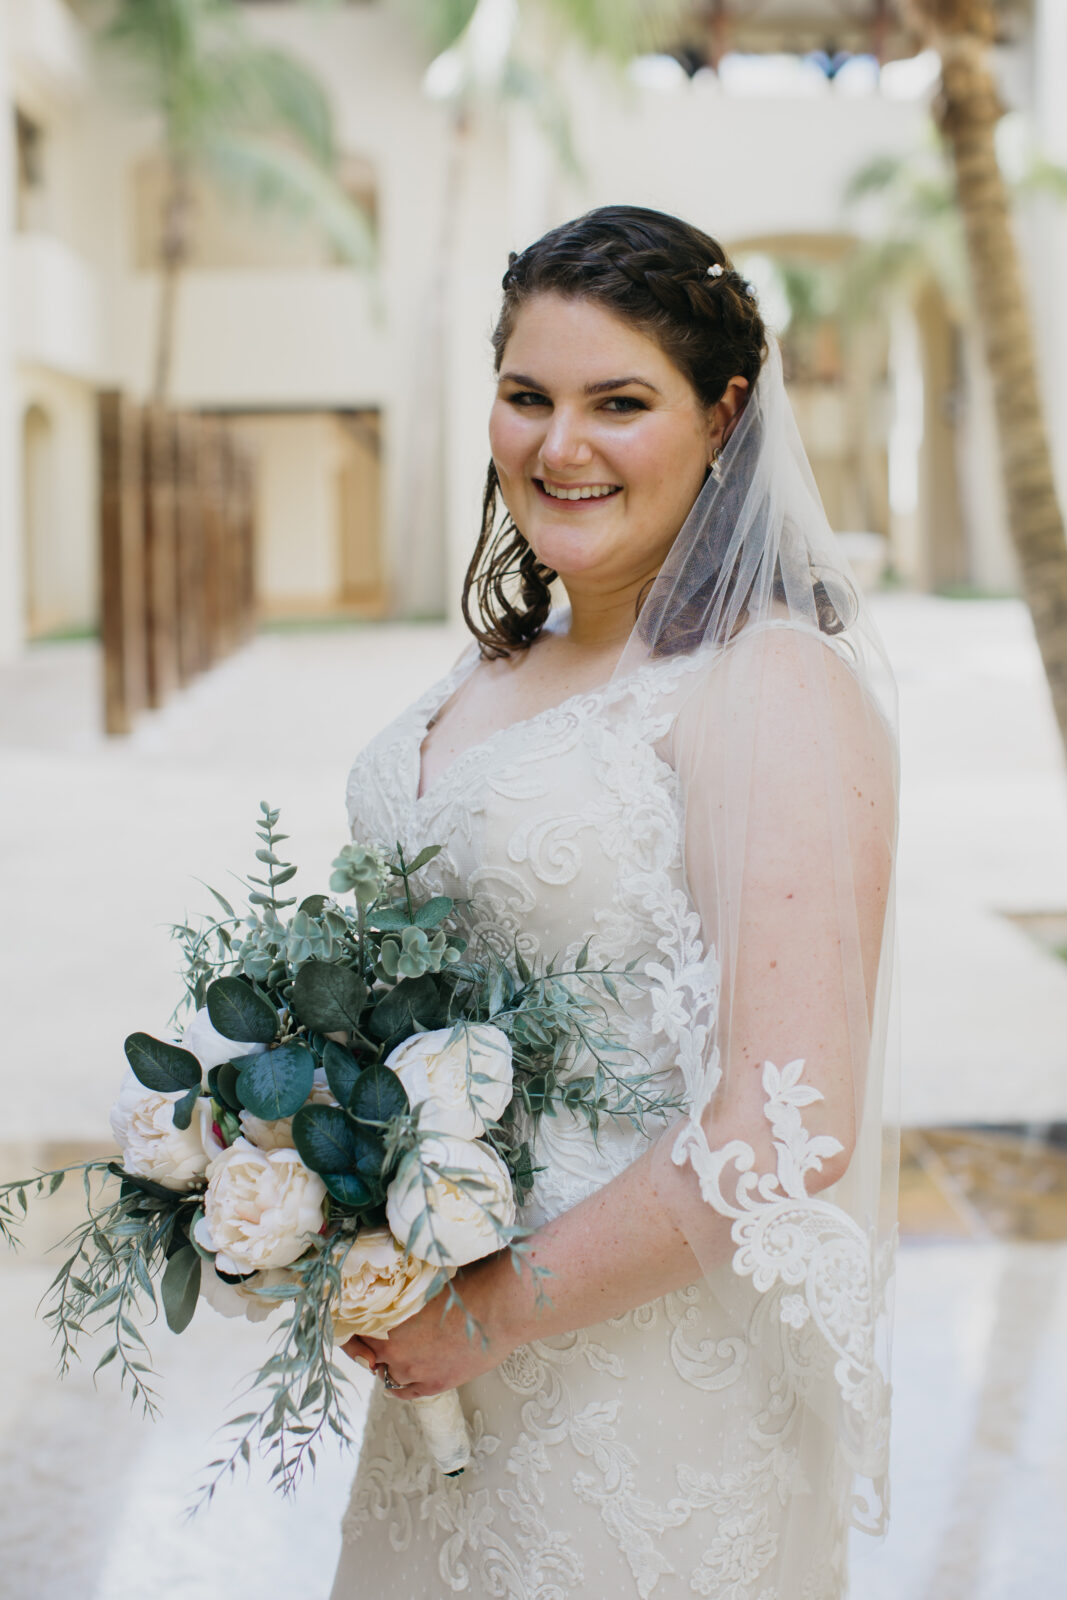 A photo of the bride on her wedding day